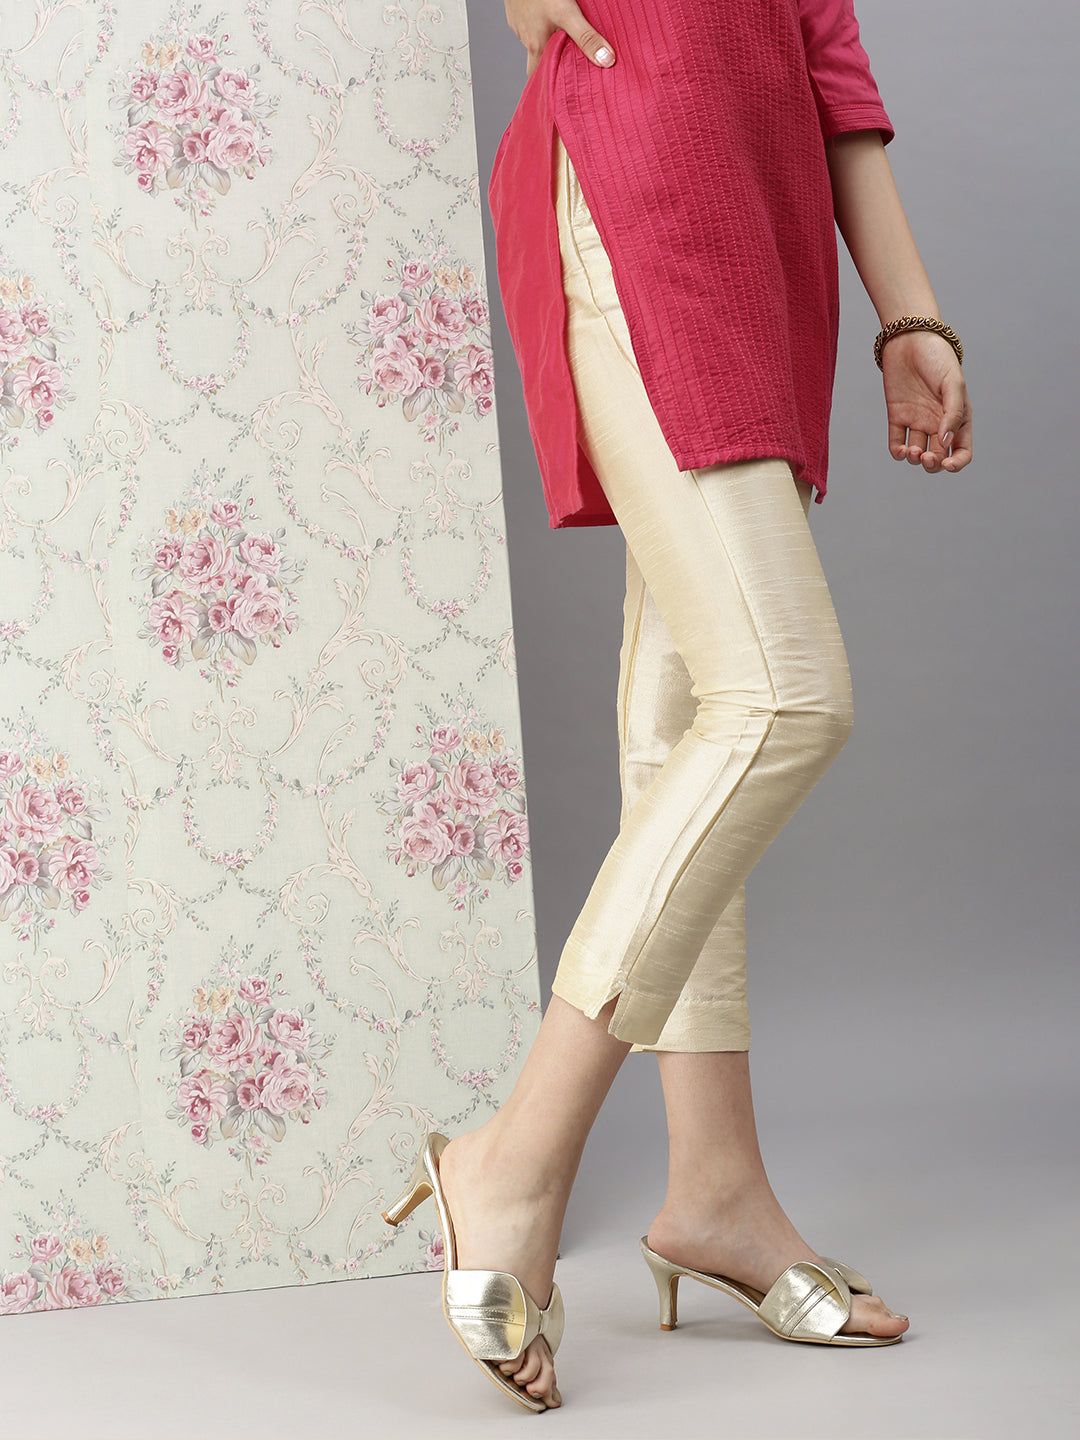 Cigarette Trousers in the size 44 for Women on sale  FASHIOLAin